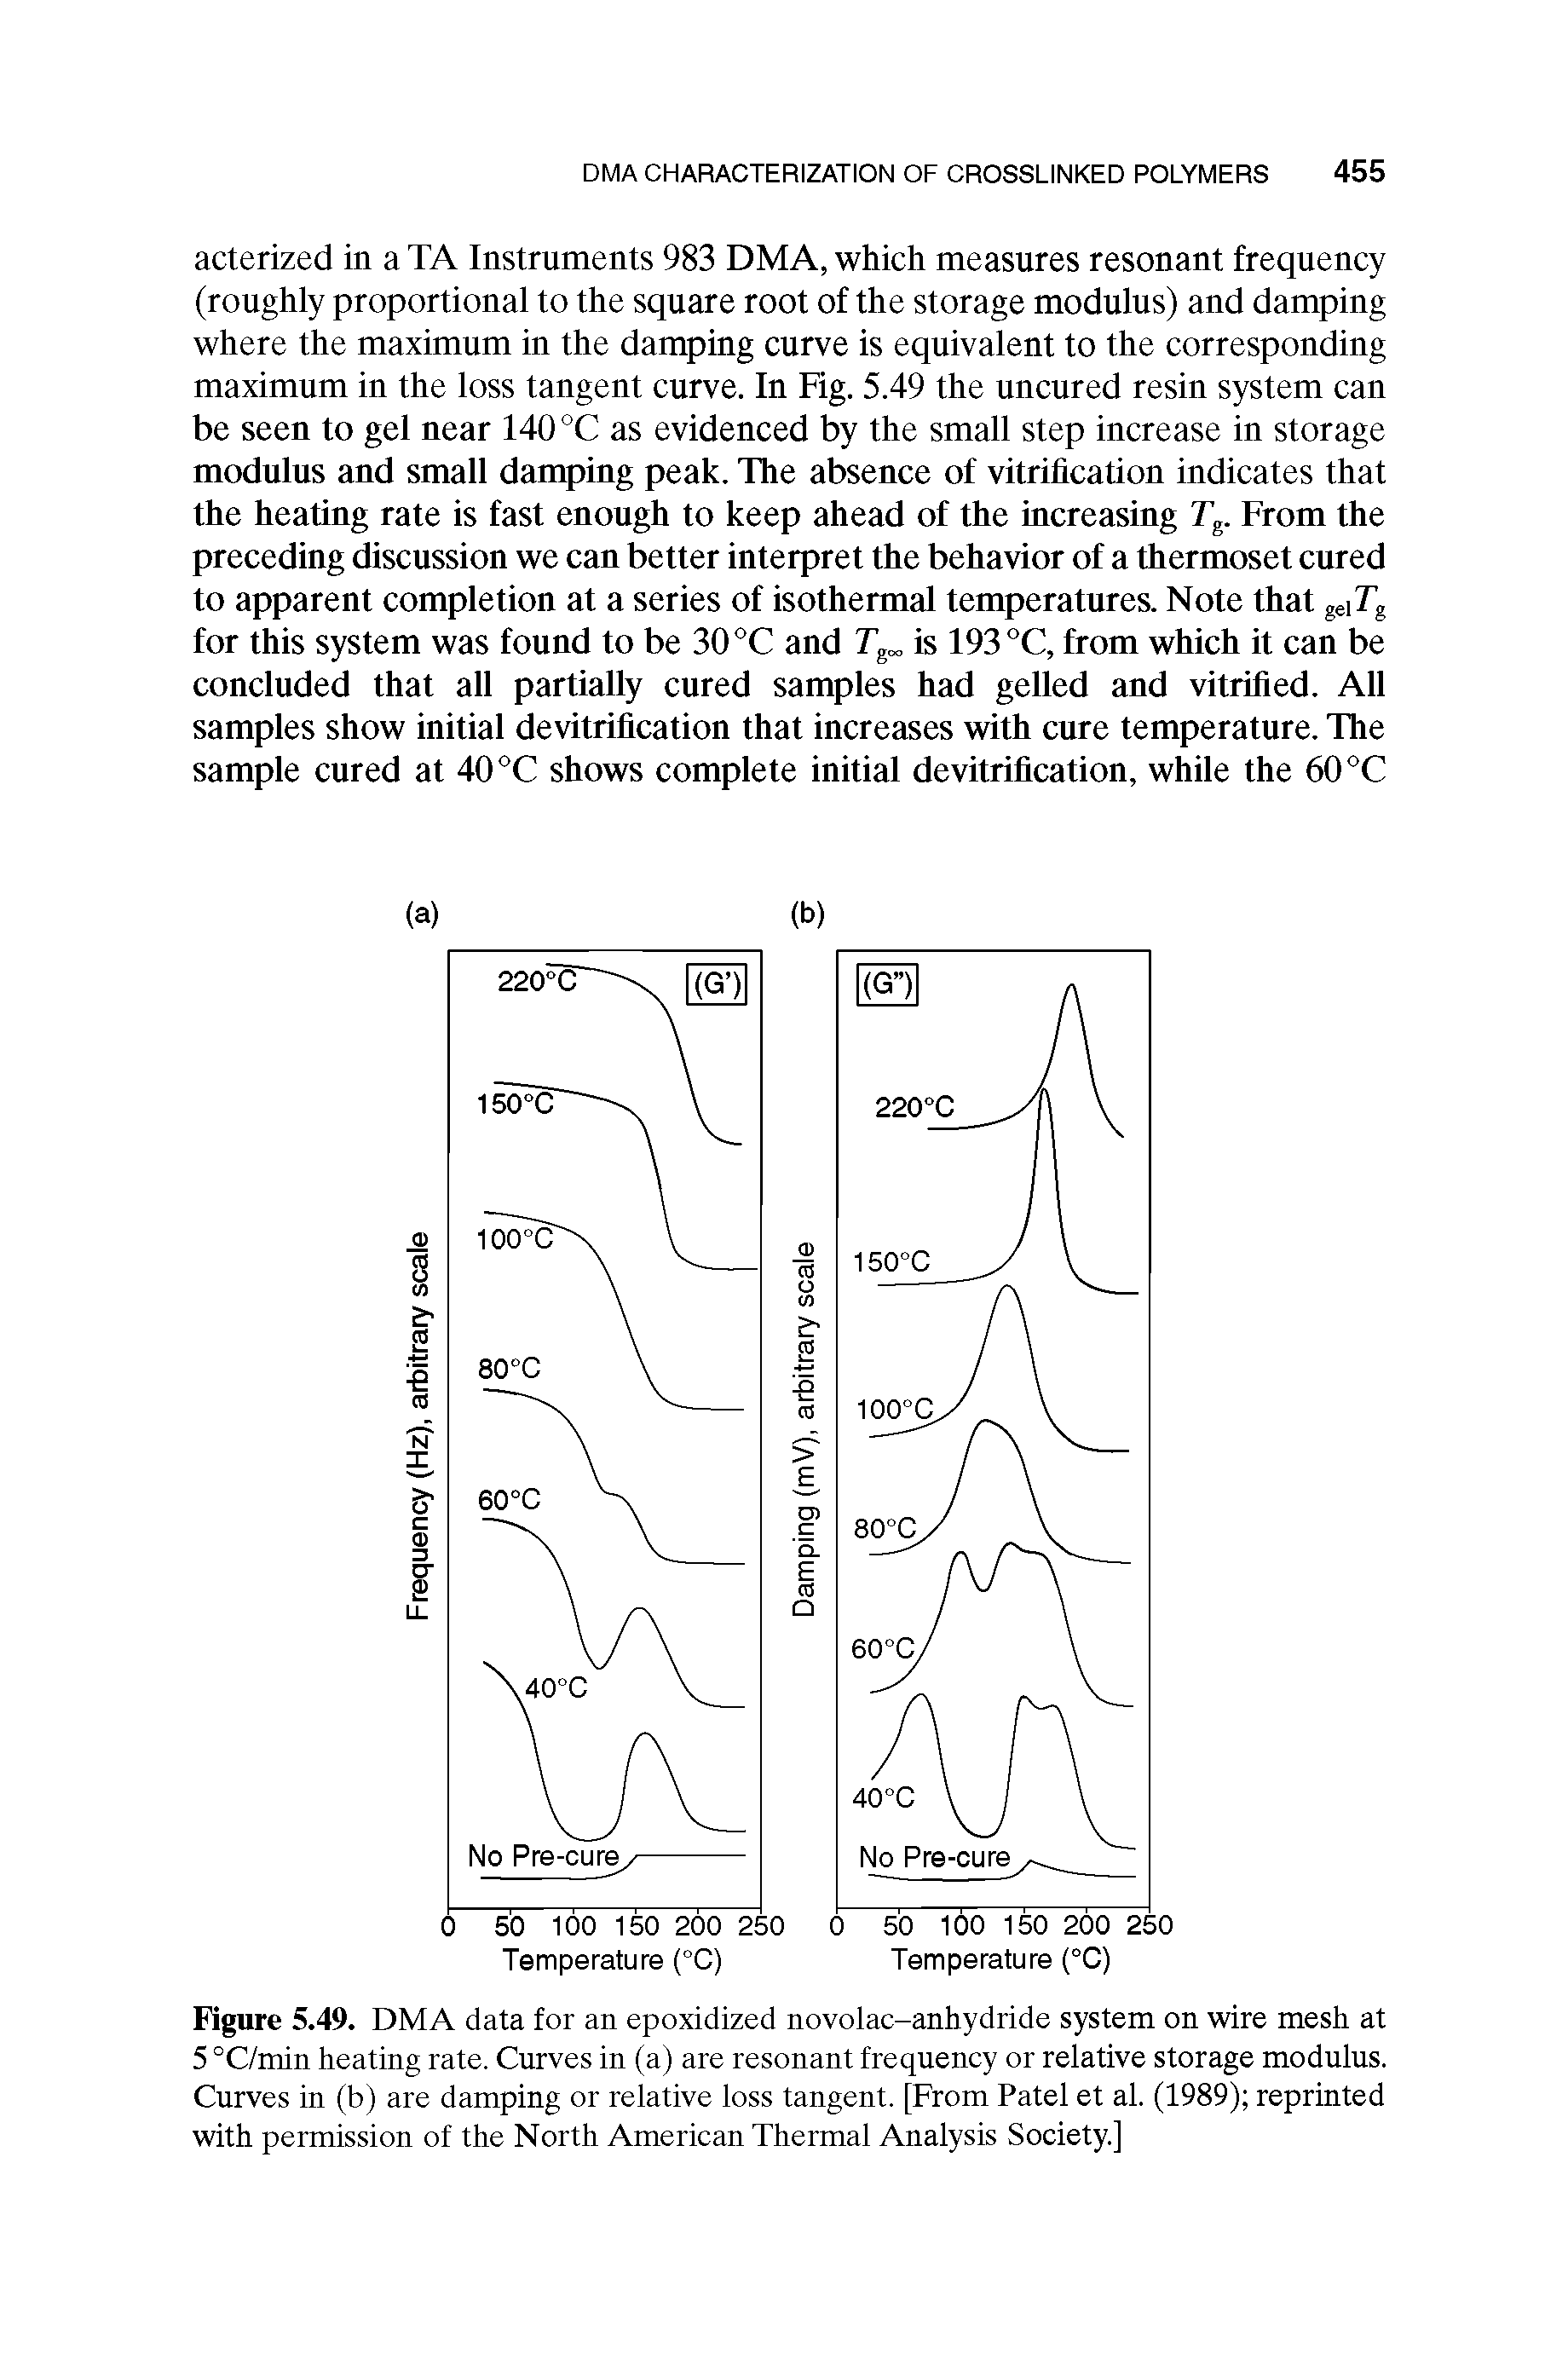 Figure 5.49. DMA data for an epoxidized novolac-anhydride system on wire mesh at 5 °C/min heating rate. Curves in (a) are resonant frequency or relative storage modulus. Curves in (b) are damping or relative loss tangent. [From Patel et al. (1989) reprinted with permission of the North American Thermal Analysis Society.]...